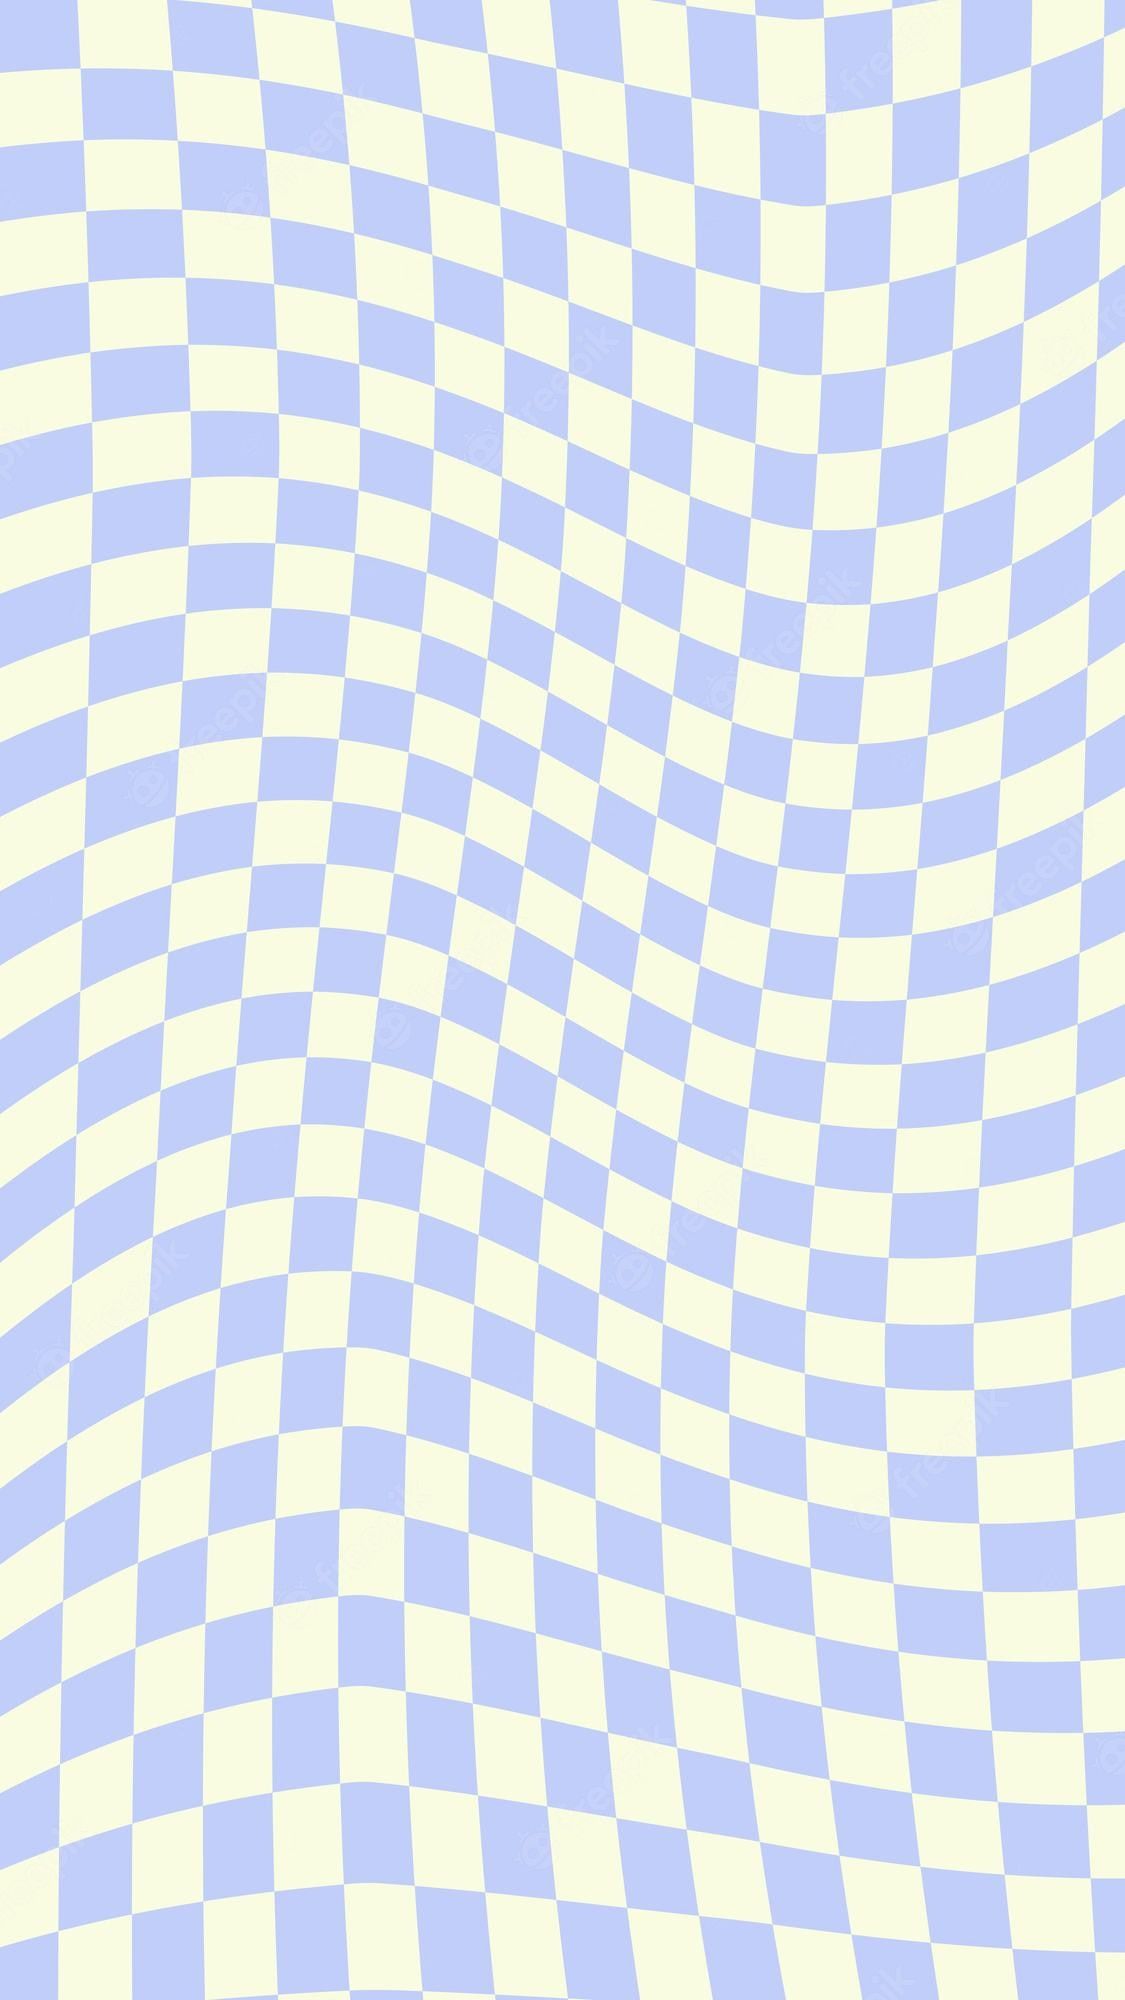 A blue and yellow checkered pattern - Pastel blue